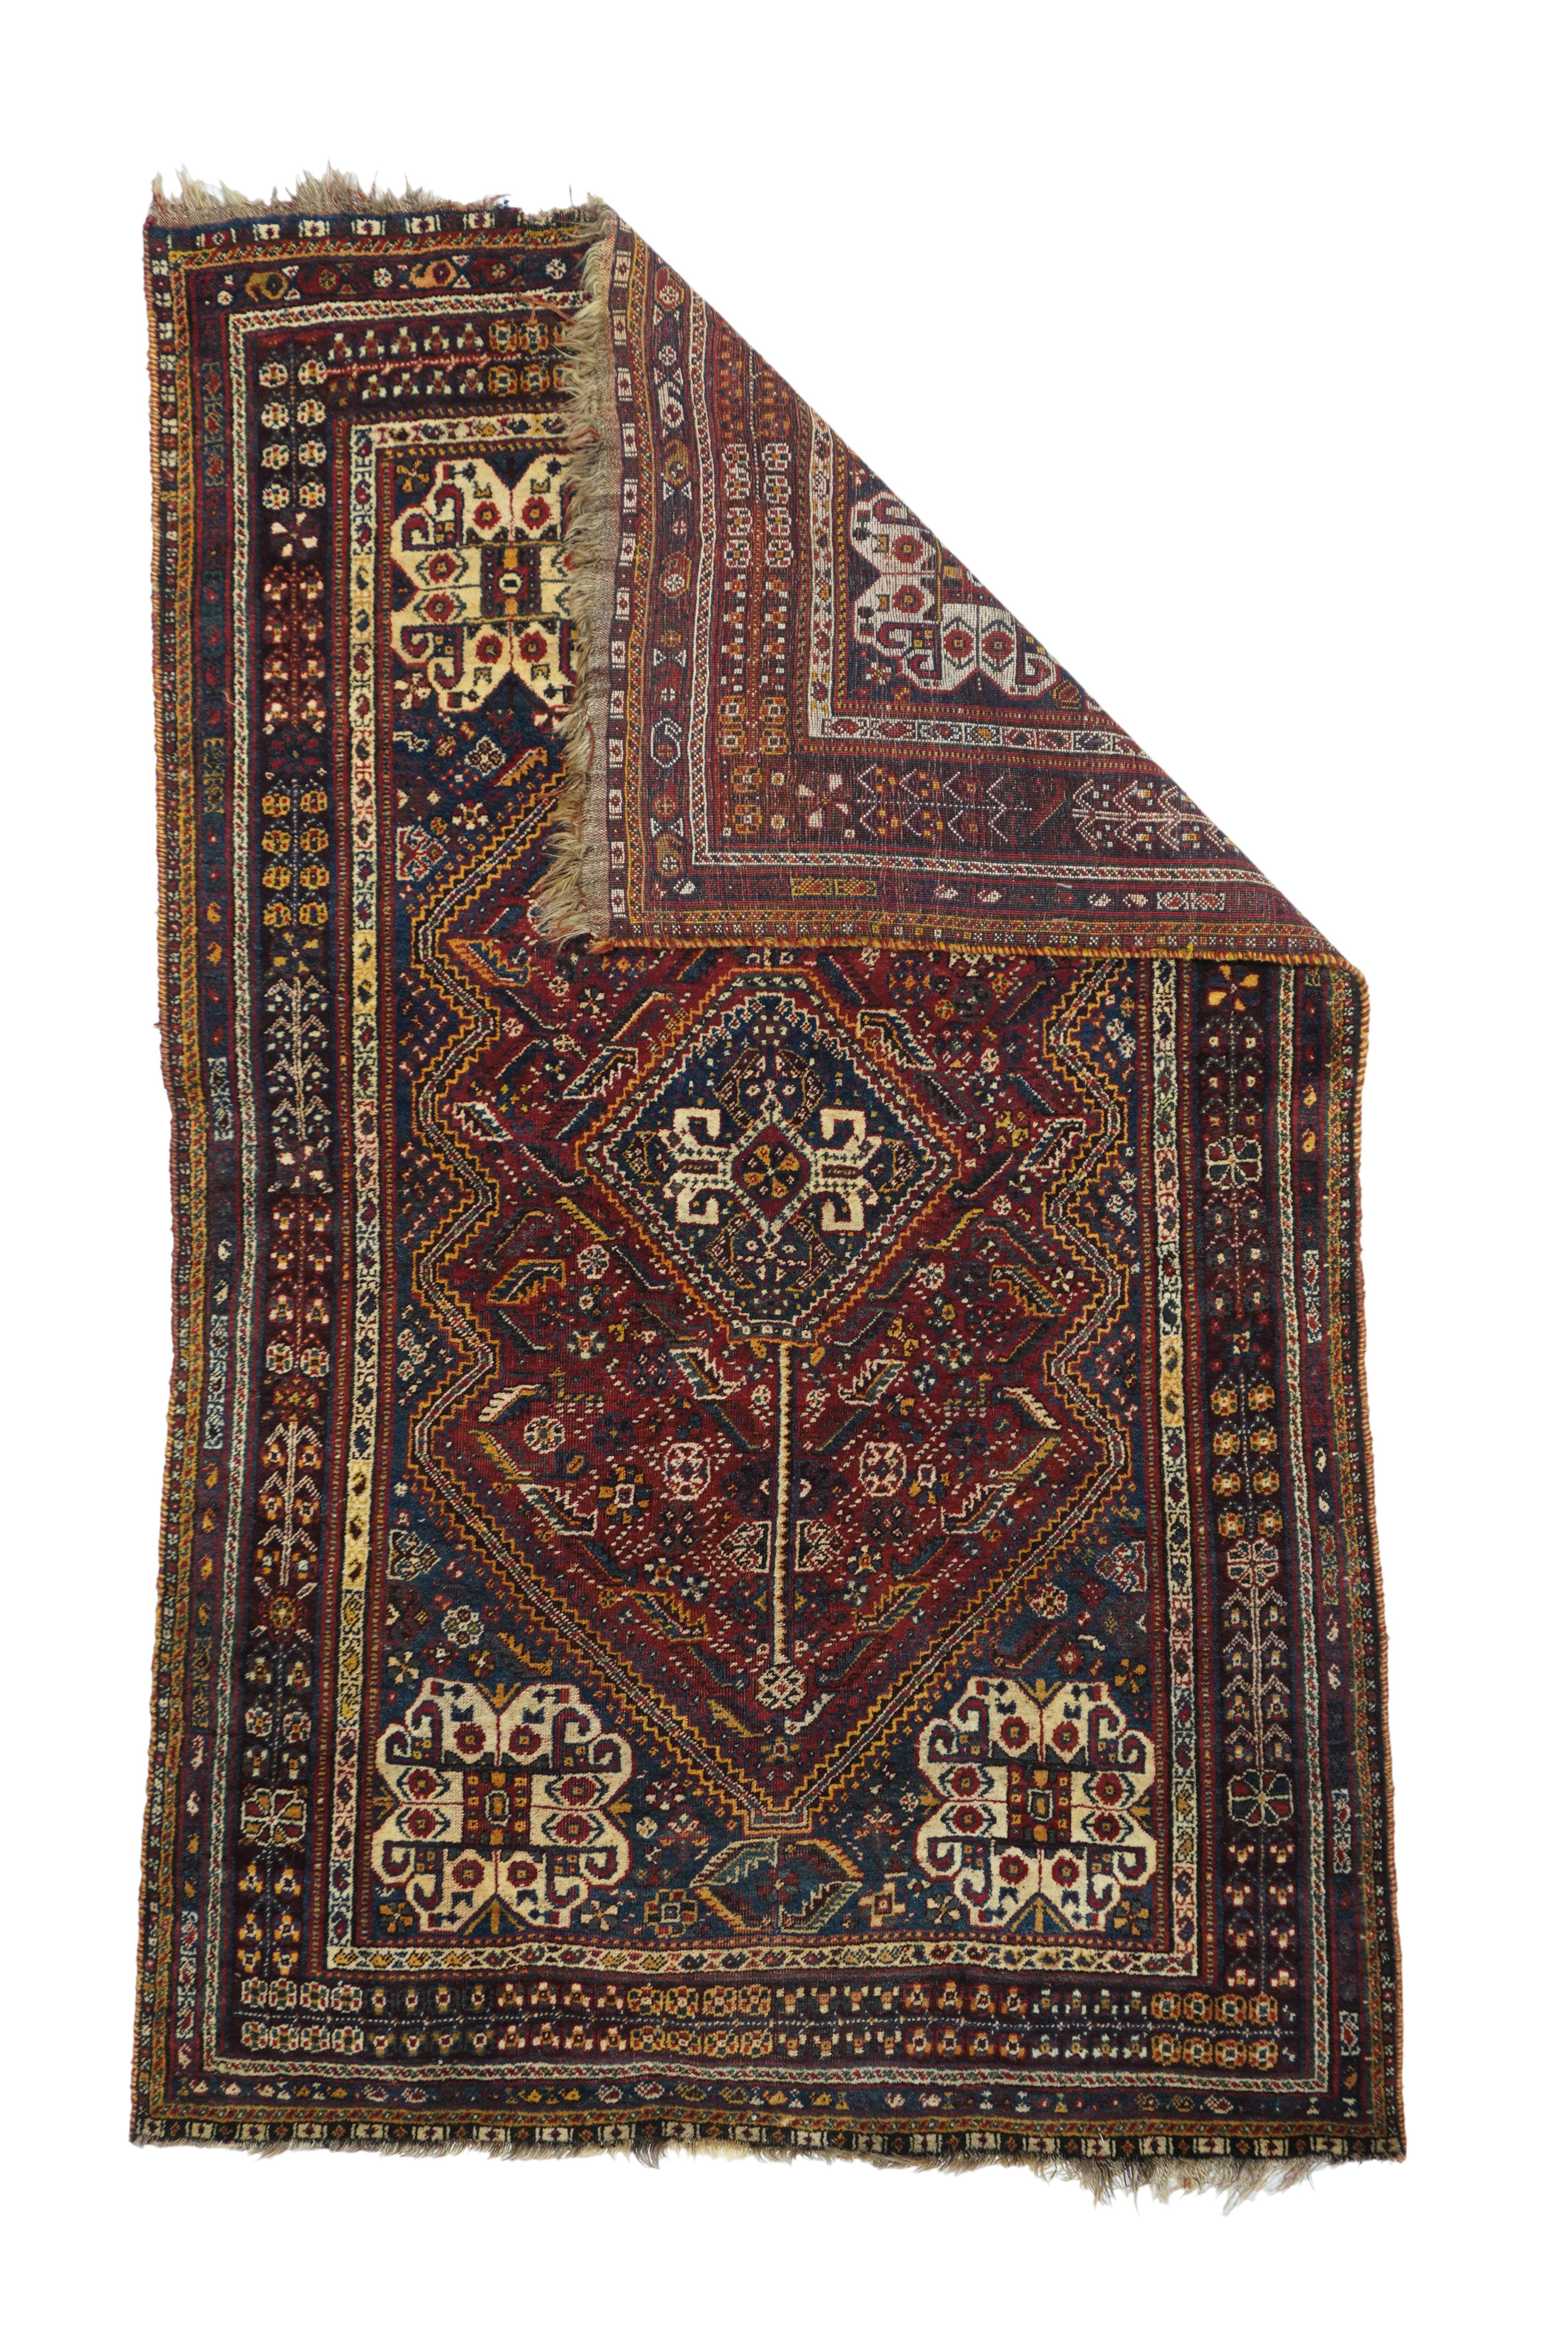 Vintage Qashqai Rug 5' x 8'2''. Fars province, SW Persian, with a dep blue field, four elaborate knot-medallions in the corners, and a central 